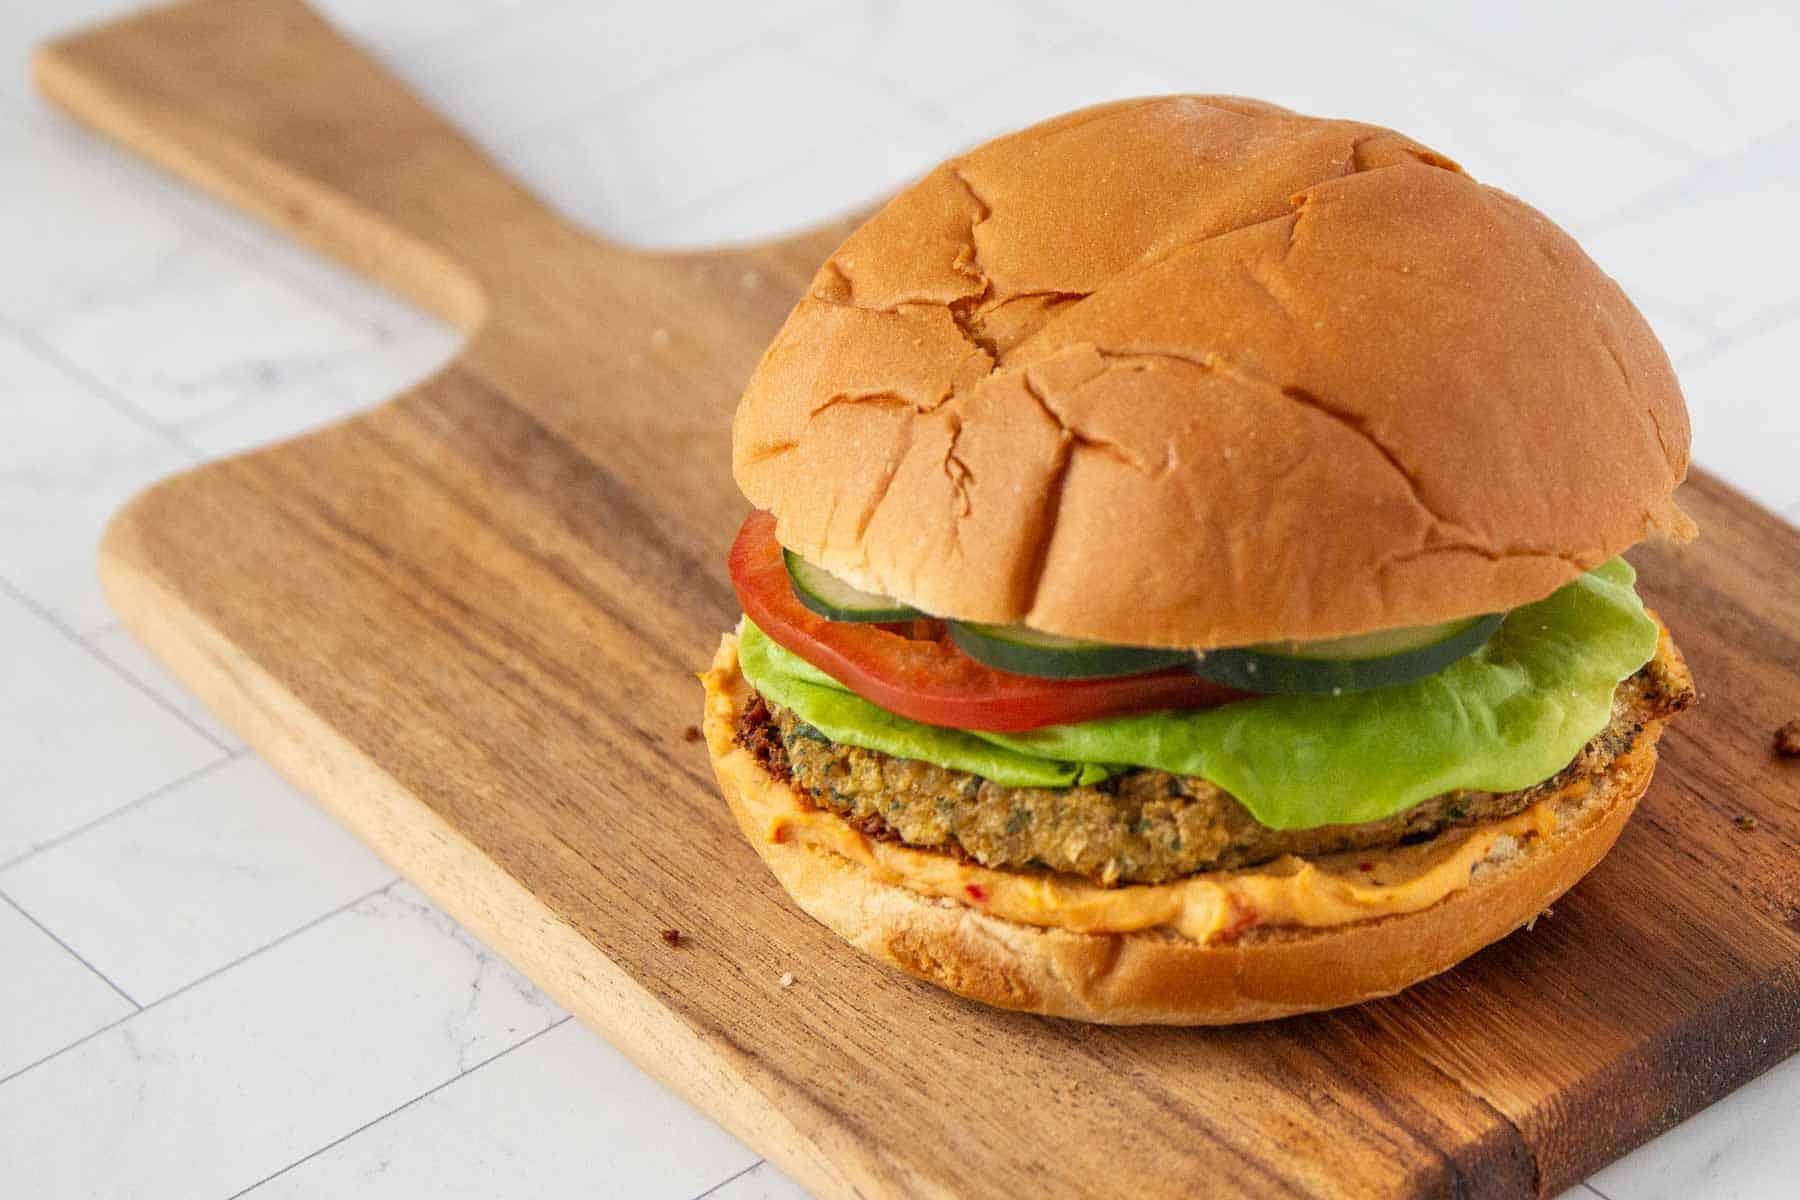 Veggie burger with lettuce, tomato, and cucumber on a wooden serving board.